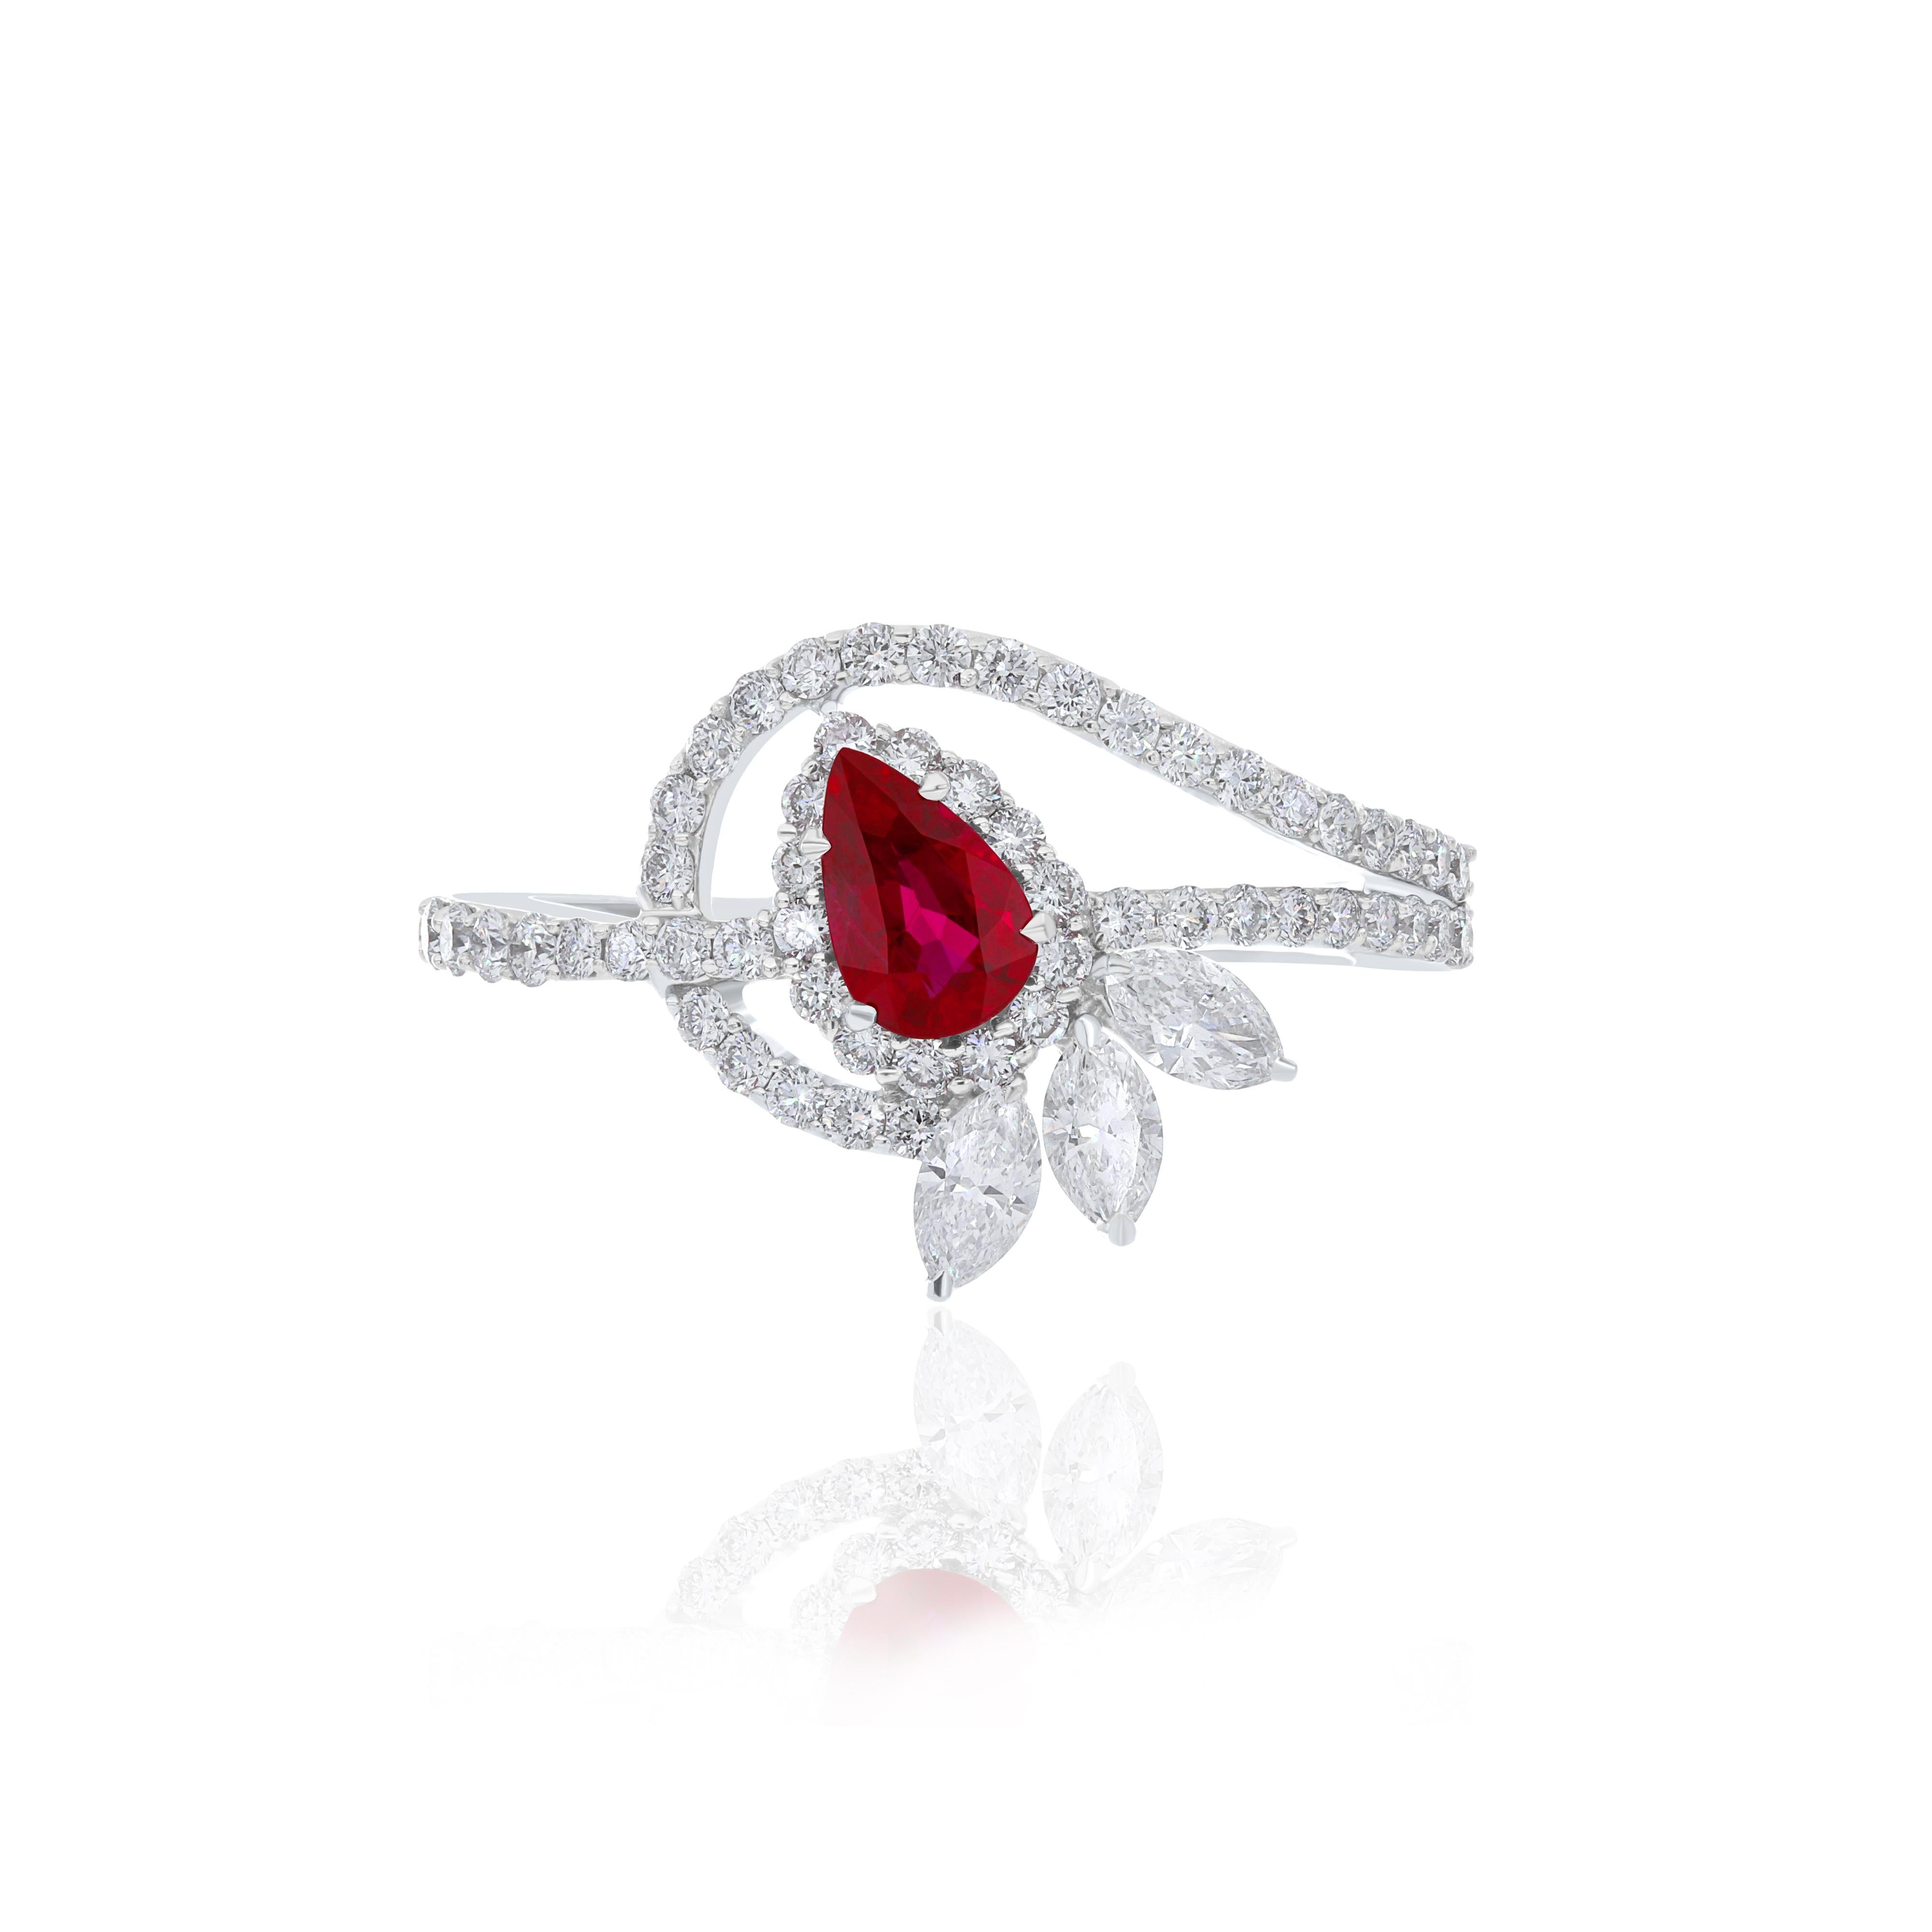 Elegant and exquisitely detailed 18 Karat White Gold Ring, center set with 0.45 Cts .Pear Shape Ruby Mozambique and micro pave set Diamonds, weighing approx. 0.81 Cts Beautifully Hand crafted in 18 Karat White Gold.

Stone Detail:
Ruby Mozambique: